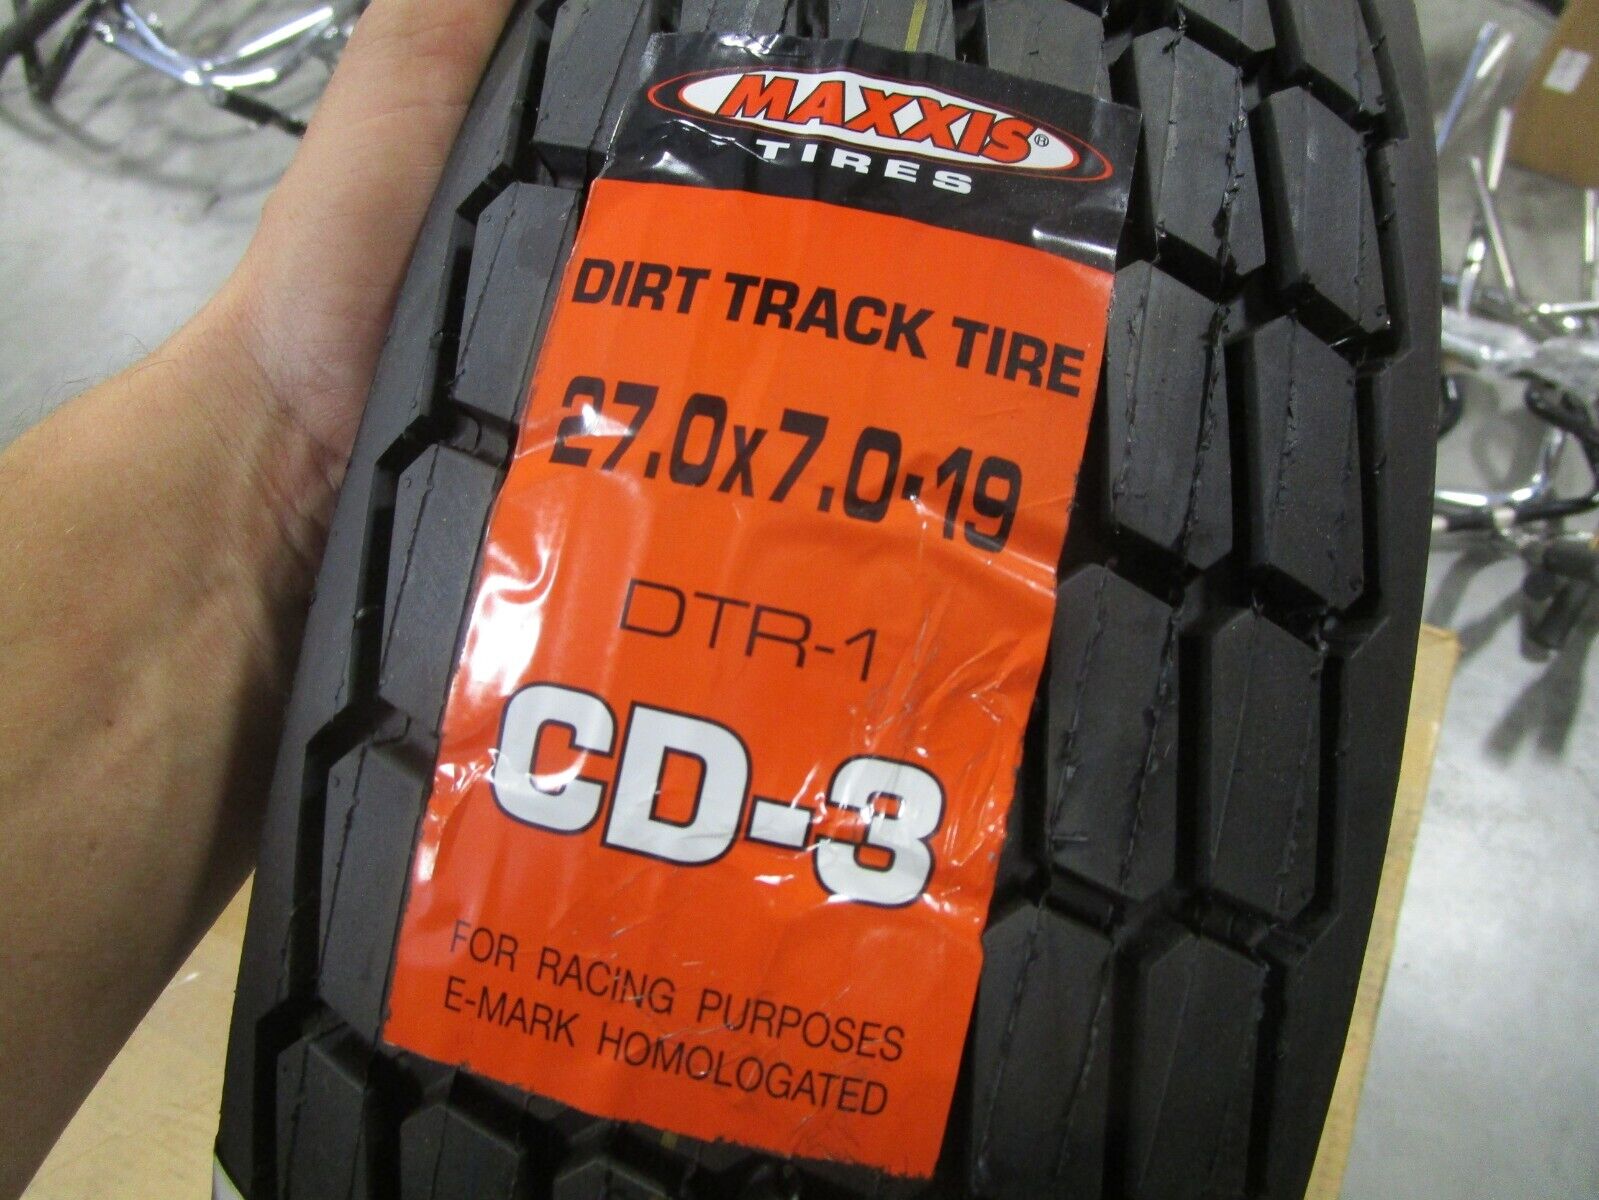 Maxxis DTR-1 Dirt Track Front or Rear Tire 27x7-19